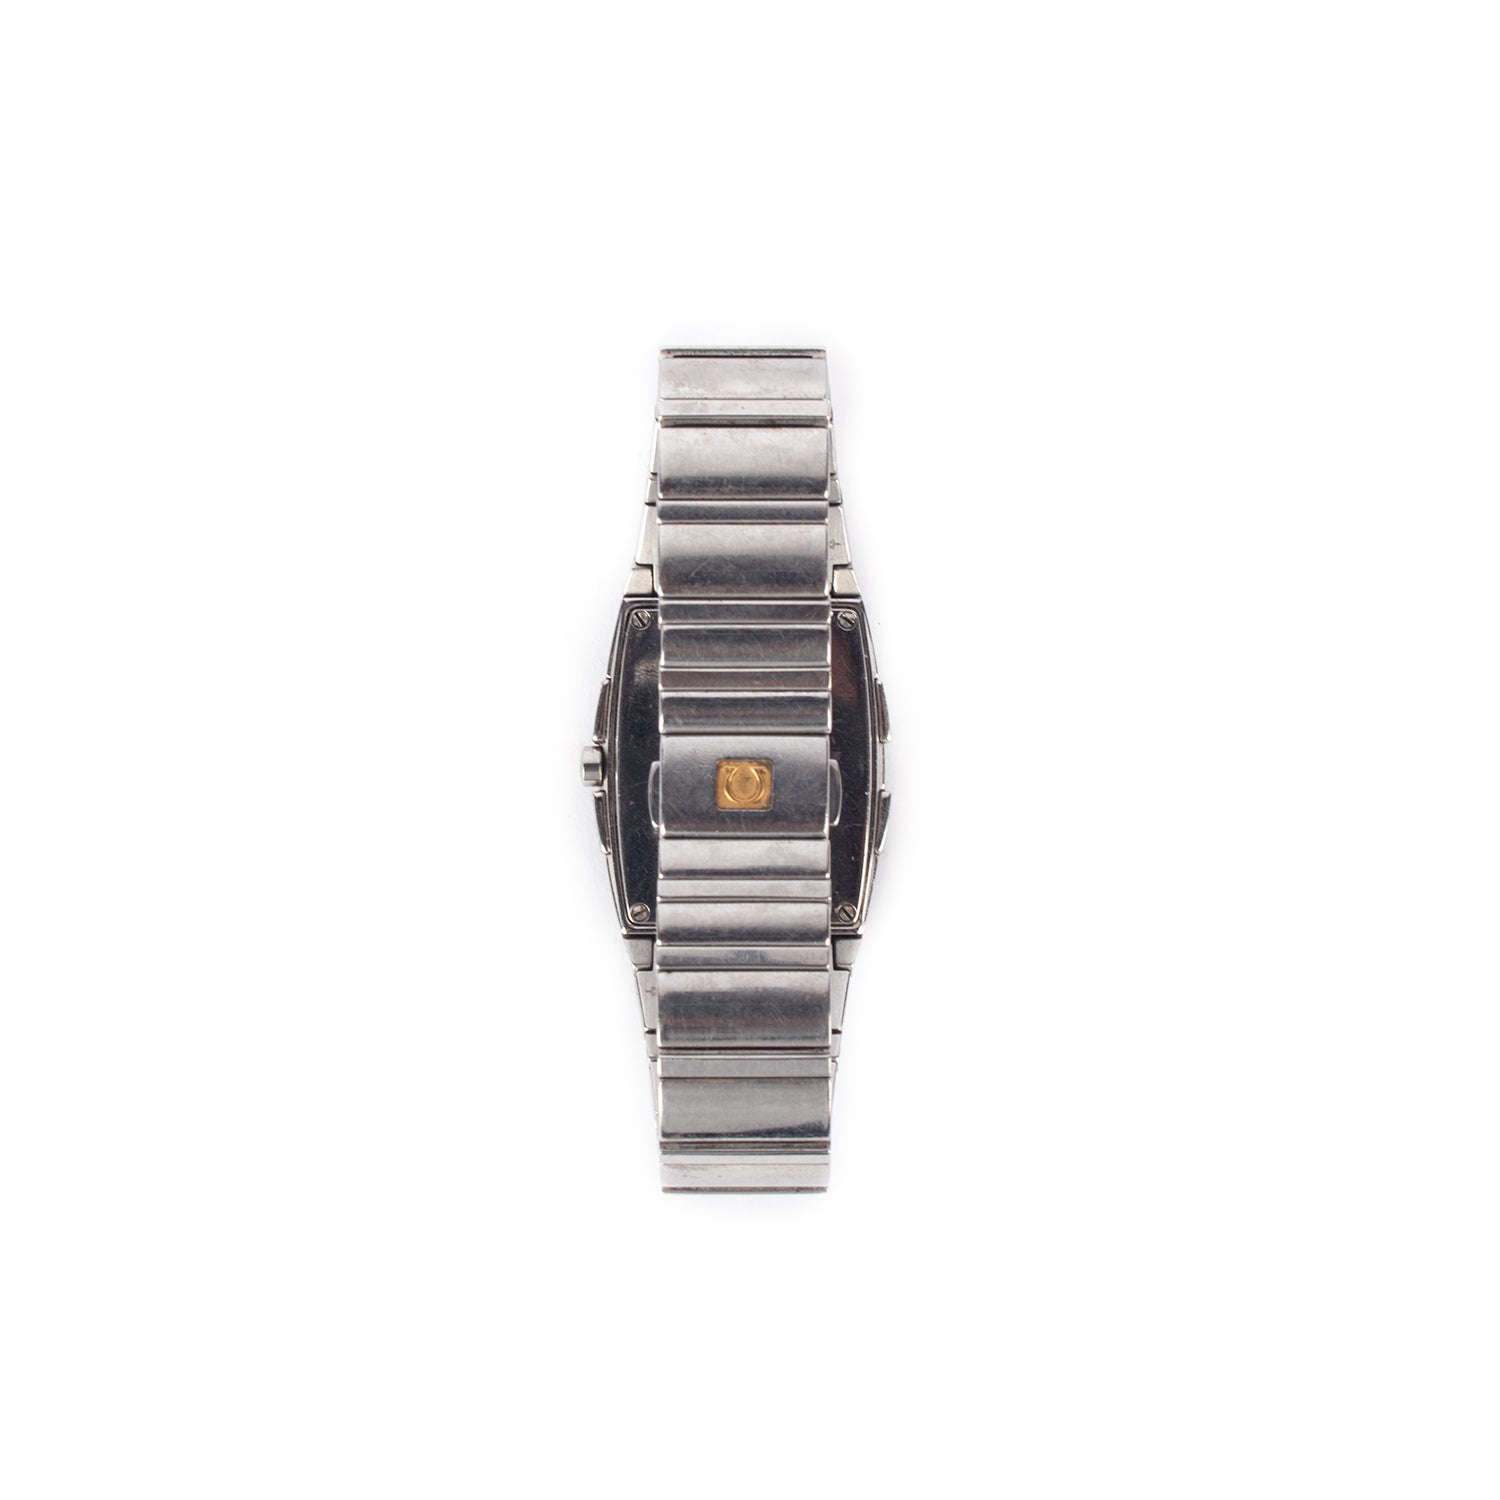 Omega Stainless Steel Watch